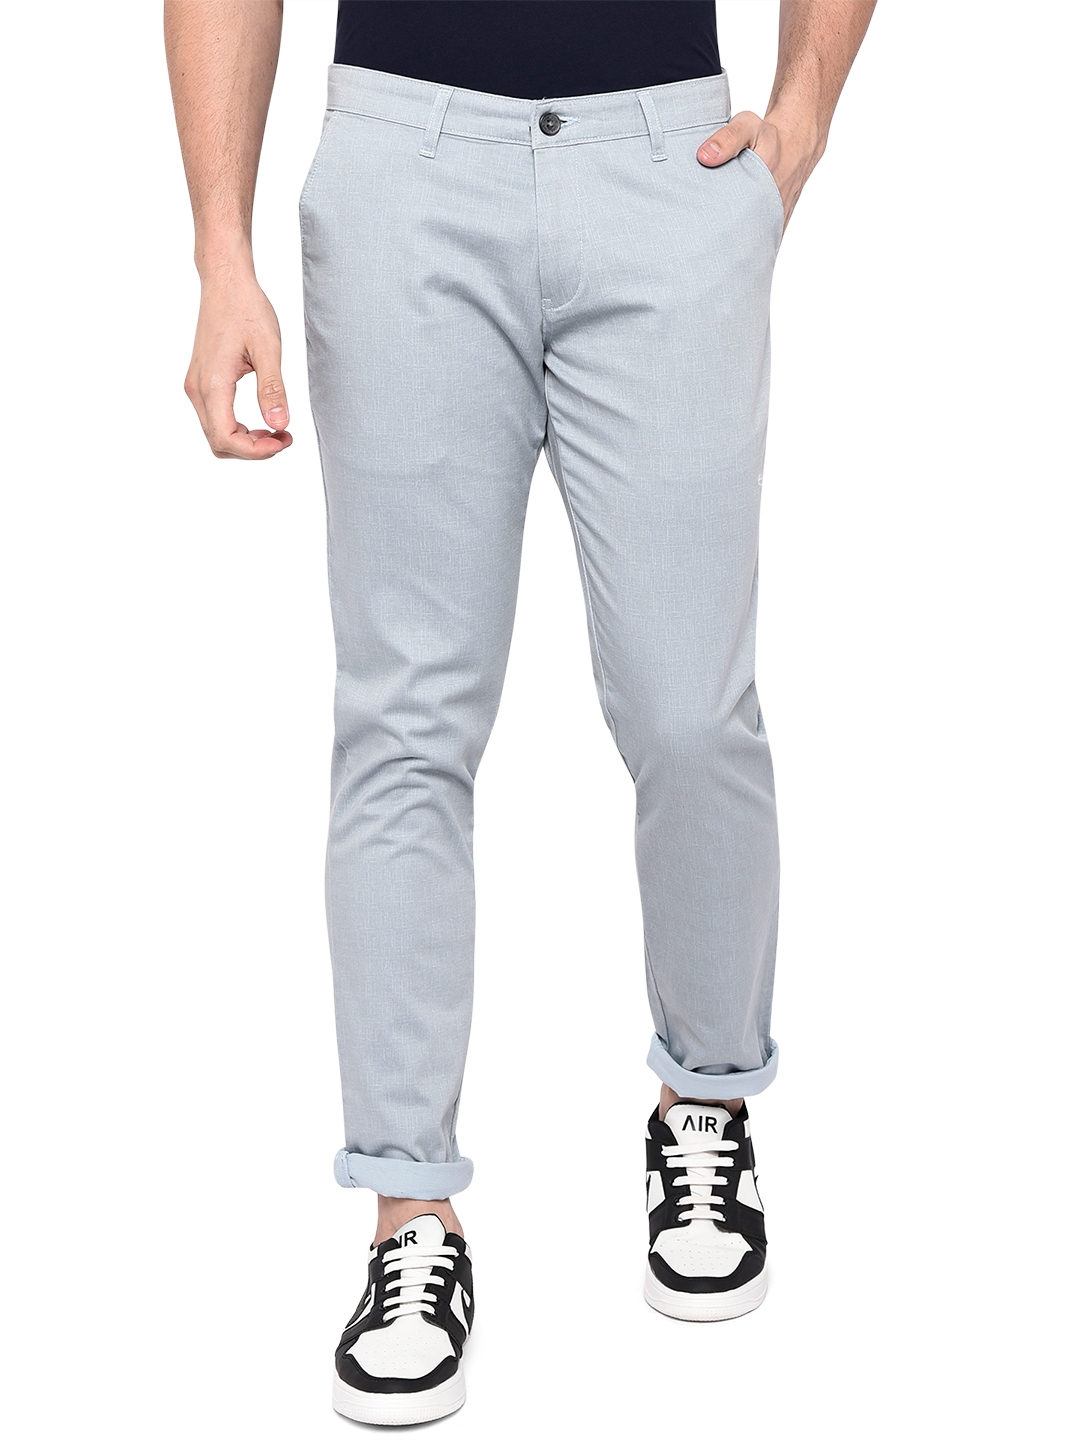 Greenfibre | Light Grey Solid Neo Fit Casual Trouser | Greenfibre